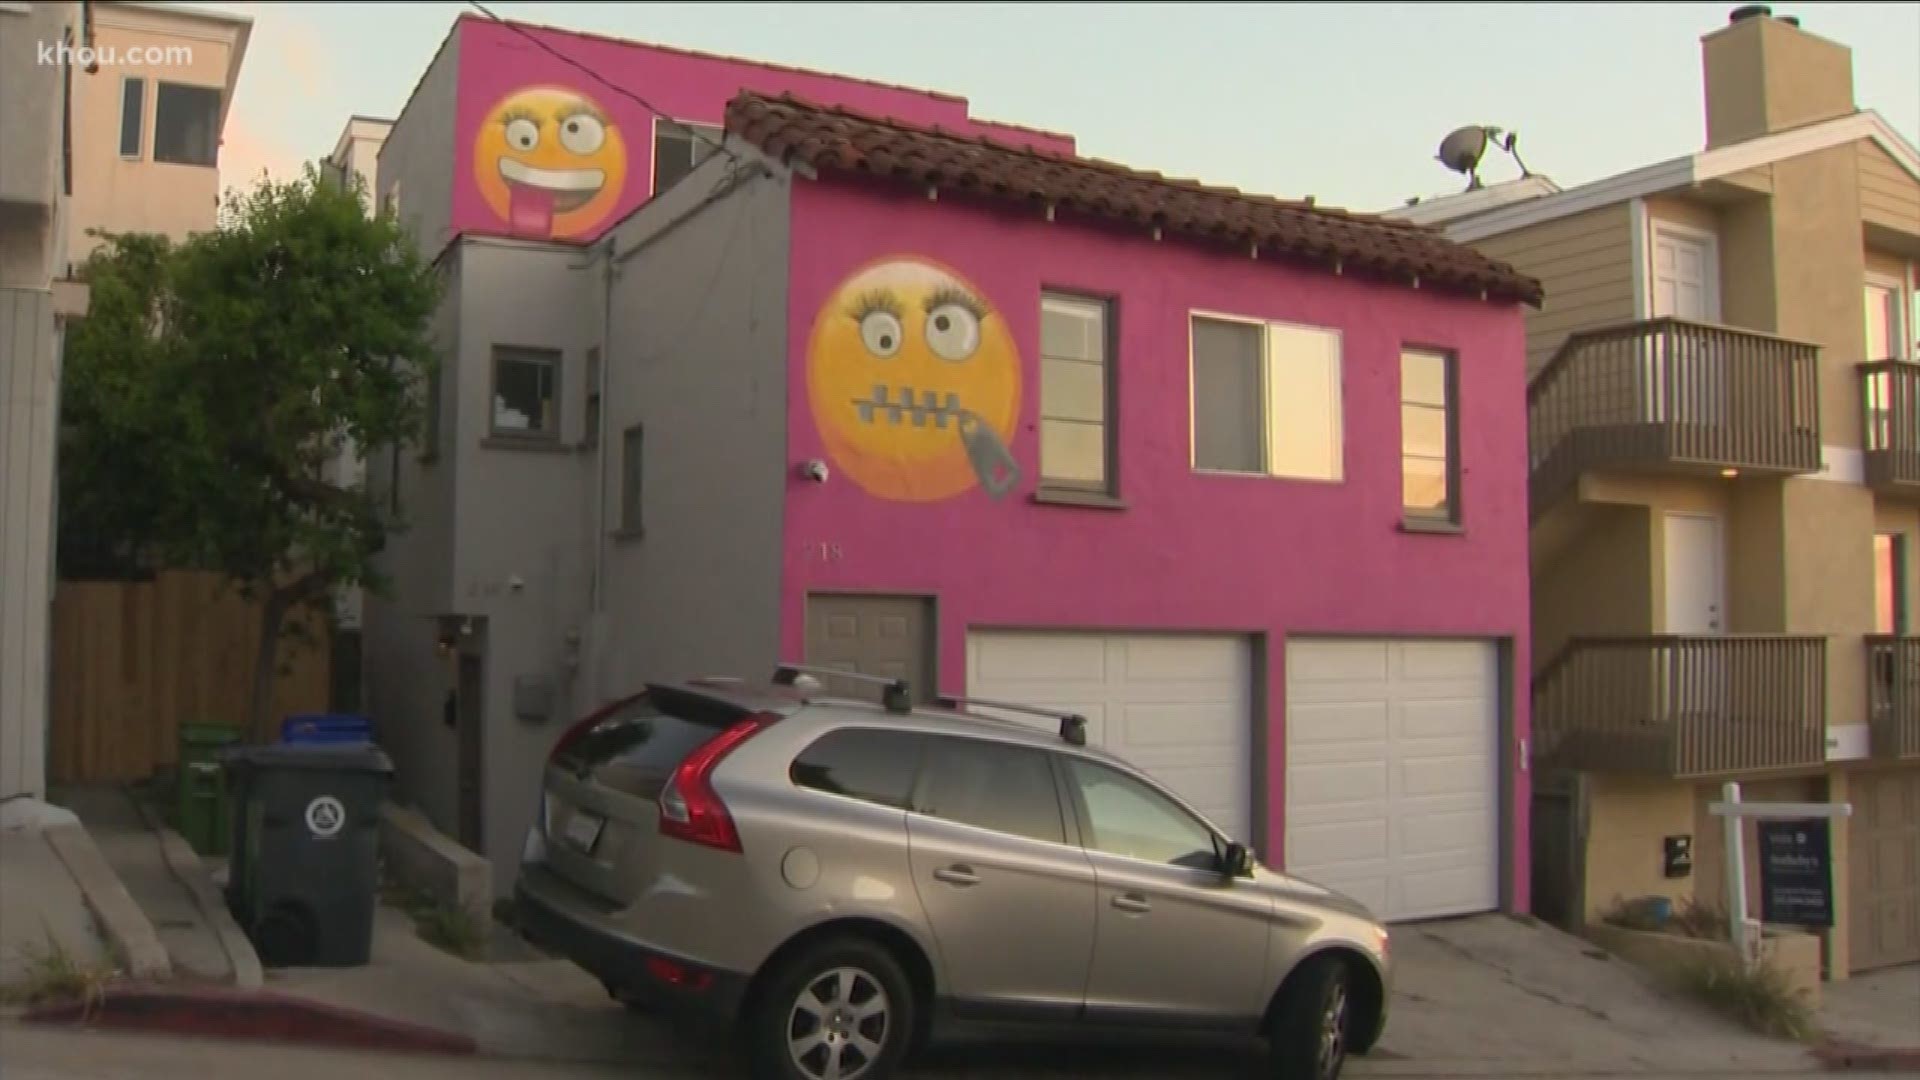 A new paint job on a house in California is getting bad reaction from neighbors.